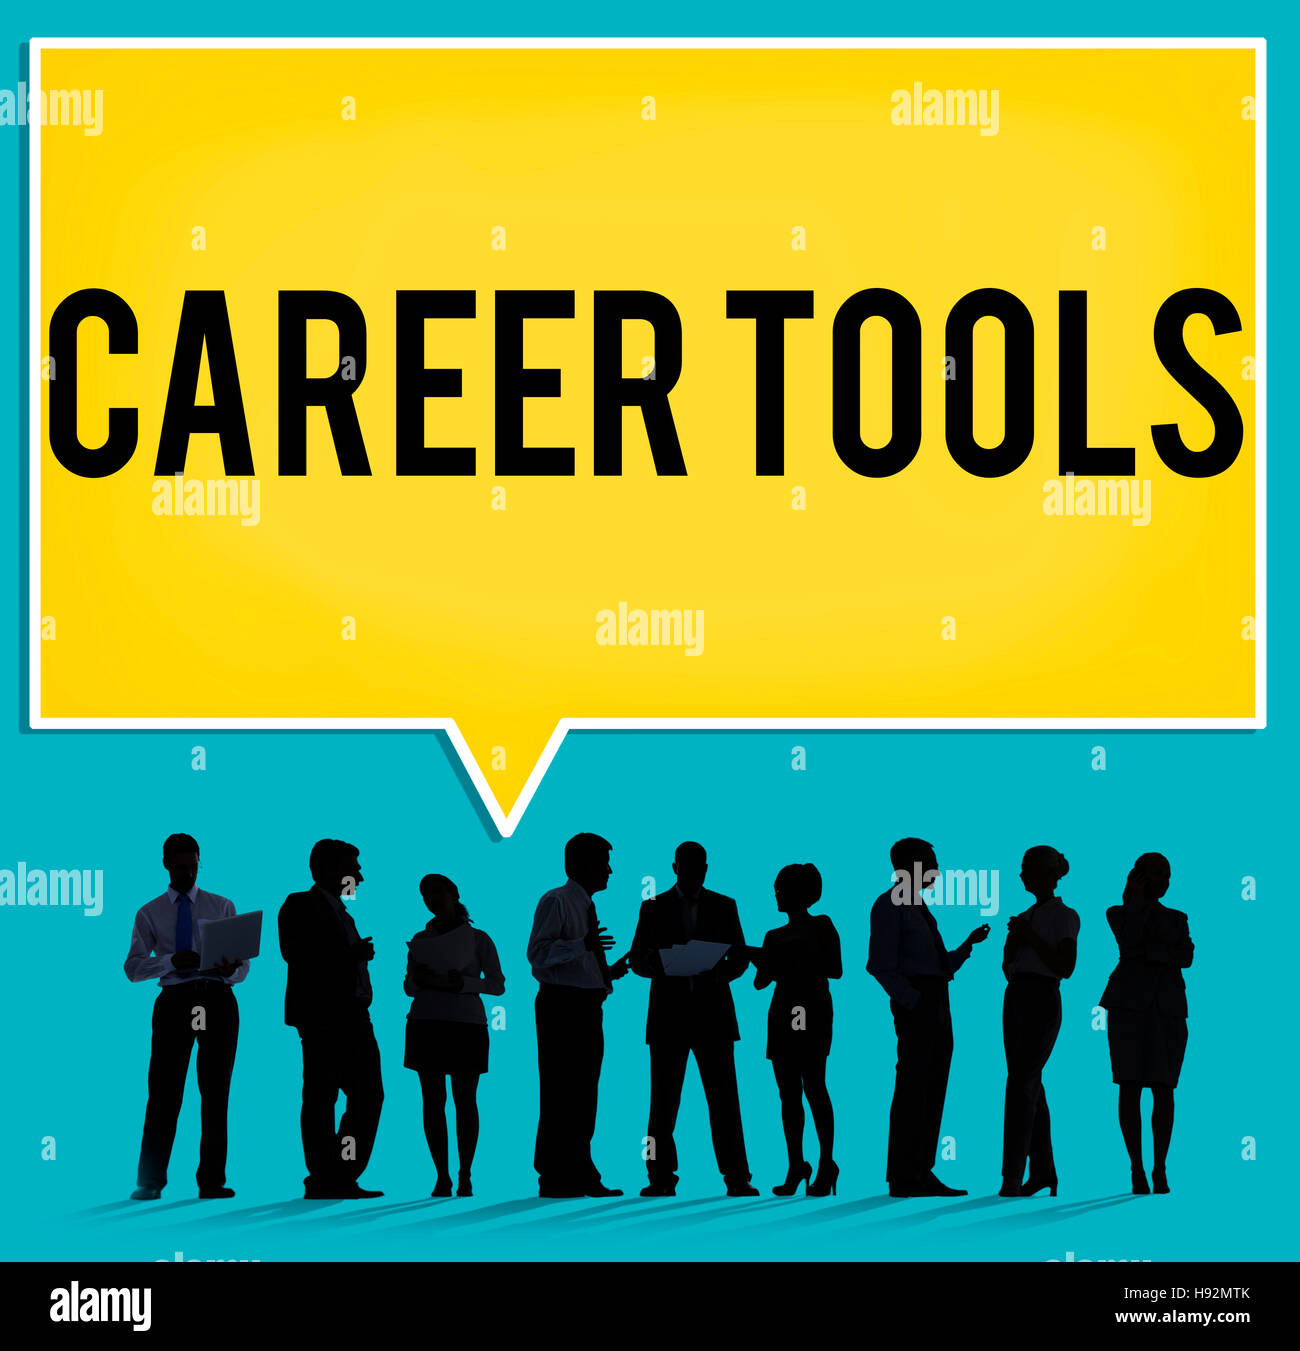 Career Tools Guidance Employment Hiring Concept Stock Photo